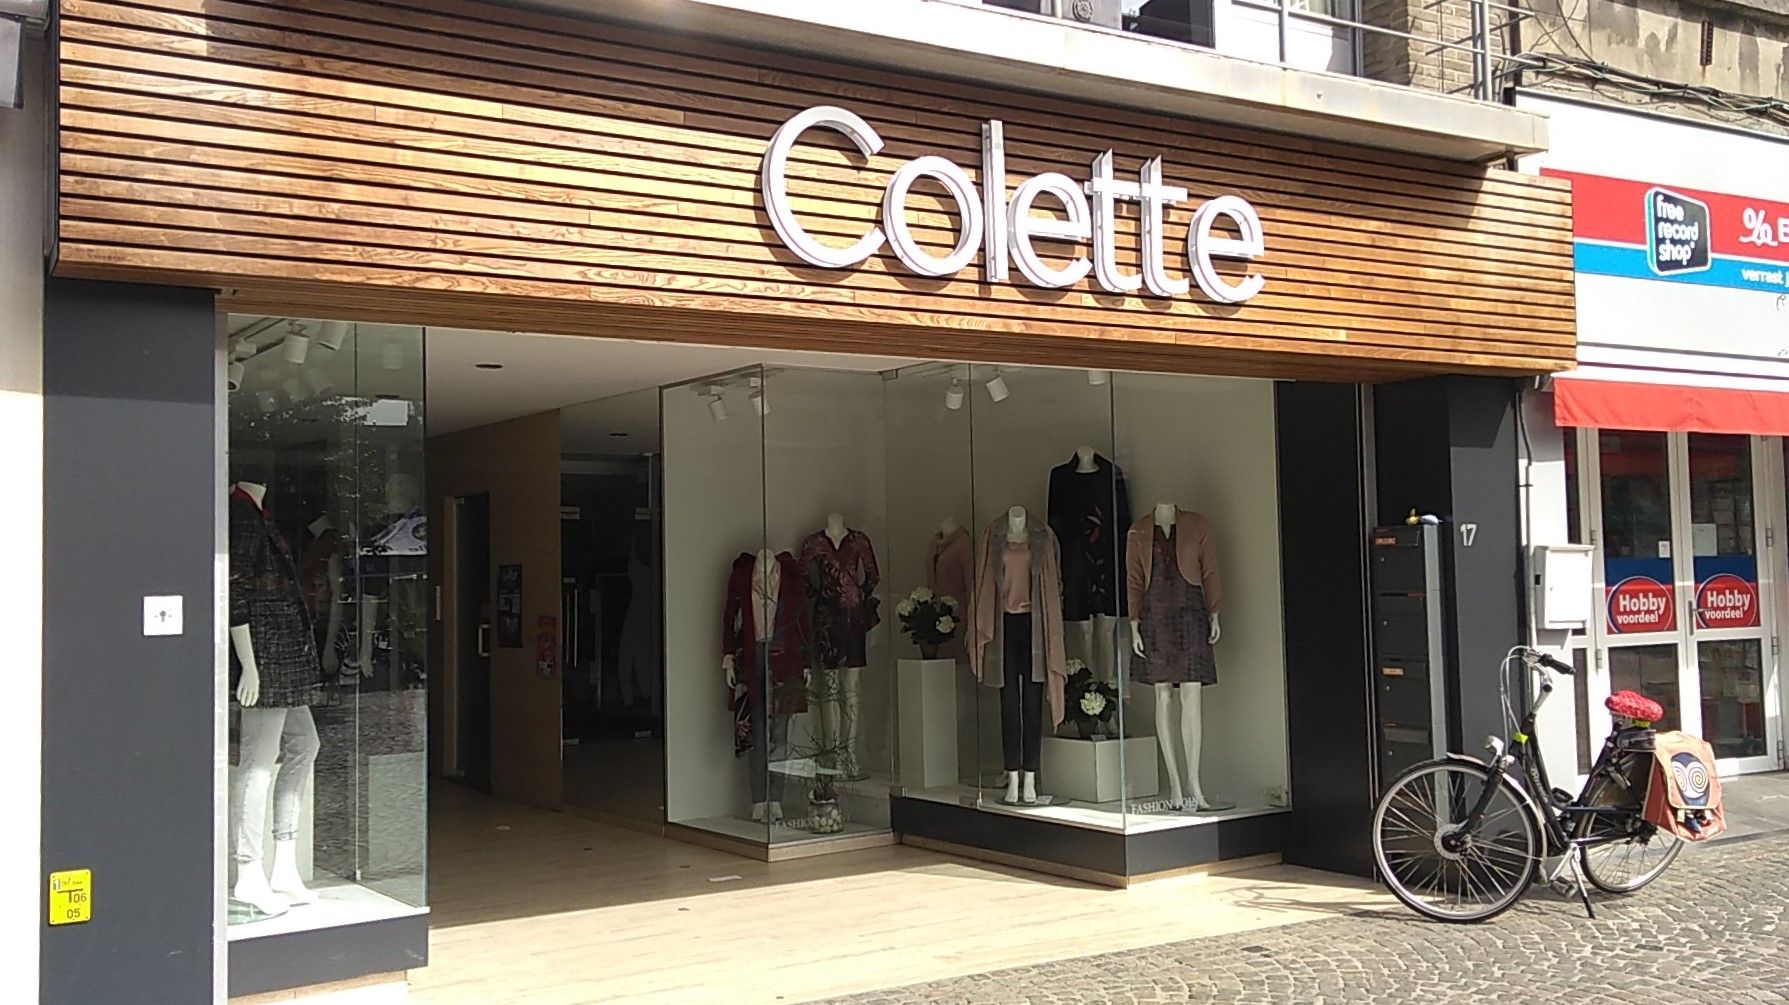 One of the shops I added earlier today in Aalst (Belgium)